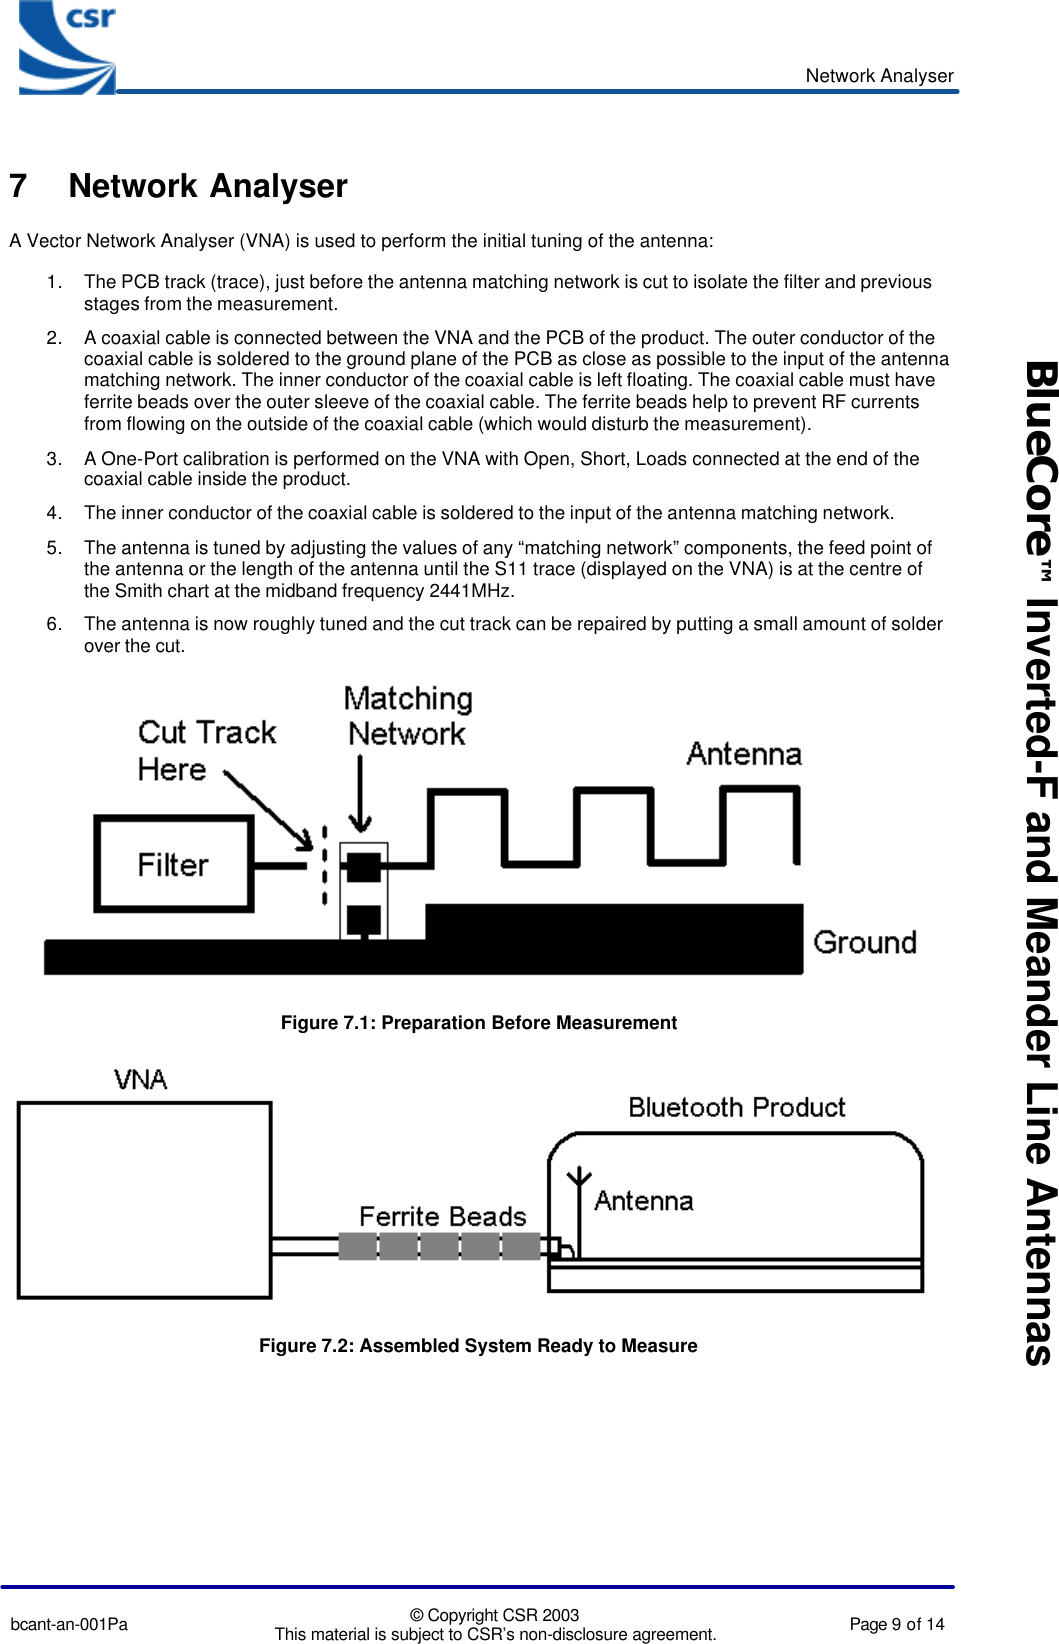 Network Analyserbcant-an-001Pa © Copyright CSR 2003This material is subject to CSR’s non-disclosure agreement. Page 9 of 14BlueCore™ Inverted-F and Meander Line Antennas7 Network AnalyserA Vector Network Analyser (VNA) is used to perform the initial tuning of the antenna:1. The PCB track (trace), just before the antenna matching network is cut to isolate the filter and previousstages from the measurement.2. A coaxial cable is connected between the VNA and the PCB of the product. The outer conductor of thecoaxial cable is soldered to the ground plane of the PCB as close as possible to the input of the antennamatching network. The inner conductor of the coaxial cable is left floating. The coaxial cable must haveferrite beads over the outer sleeve of the coaxial cable. The ferrite beads help to prevent RF currentsfrom flowing on the outside of the coaxial cable (which would disturb the measurement).3. A One-Port calibration is performed on the VNA with Open, Short, Loads connected at the end of thecoaxial cable inside the product.4. The inner conductor of the coaxial cable is soldered to the input of the antenna matching network.5. The antenna is tuned by adjusting the values of any “matching network” components, the feed point ofthe antenna or the length of the antenna until the S11 trace (displayed on the VNA) is at the centre ofthe Smith chart at the midband frequency 2441MHz.6. The antenna is now roughly tuned and the cut track can be repaired by putting a small amount of solderover the cut.Figure 7.1: Preparation Before MeasurementFigure 7.2: Assembled System Ready to Measure